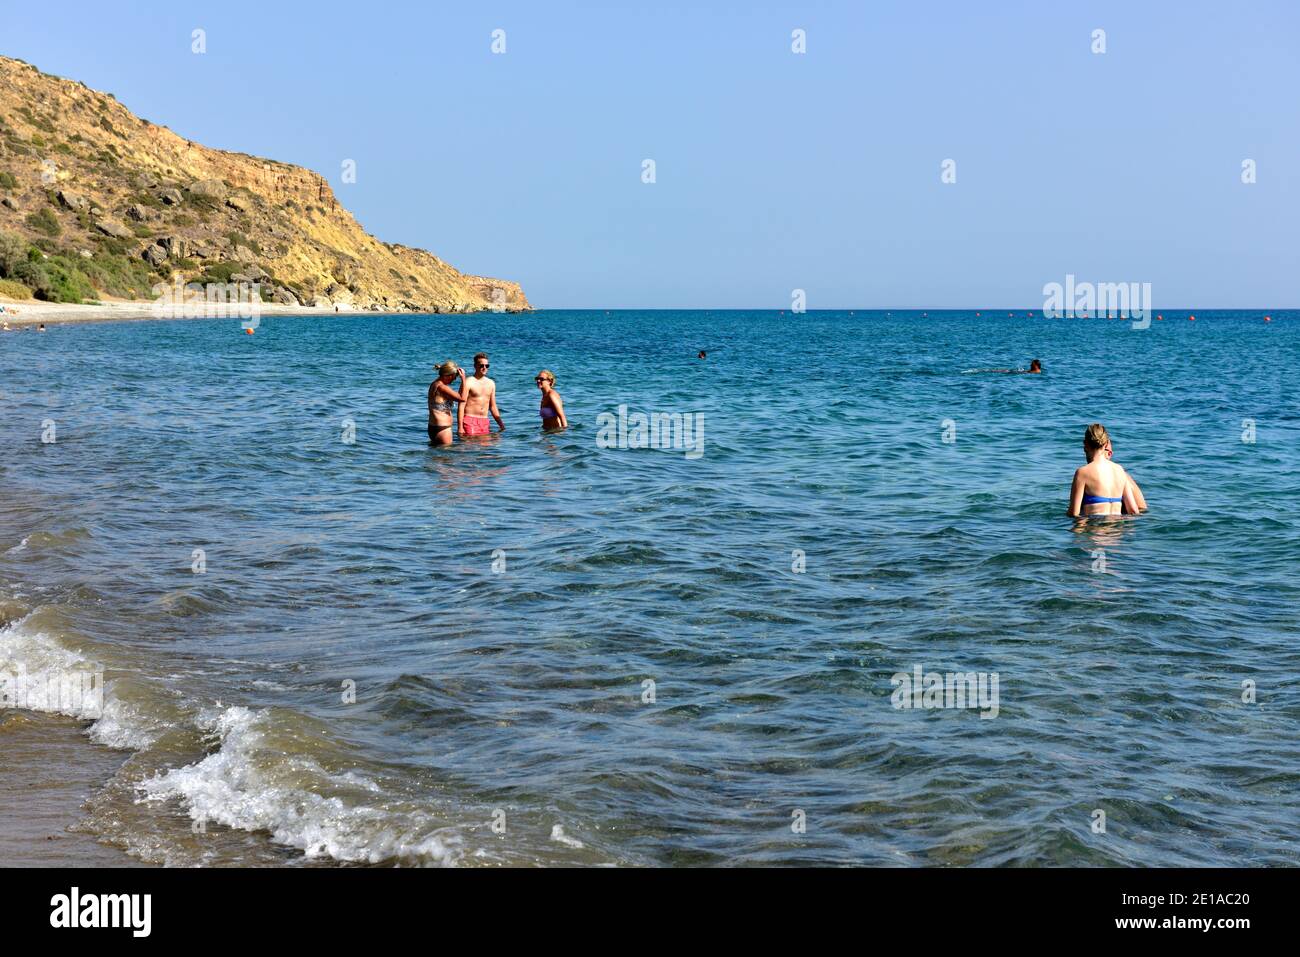 People standing in the calm blue sea off beach others swimming further out Stock Photo